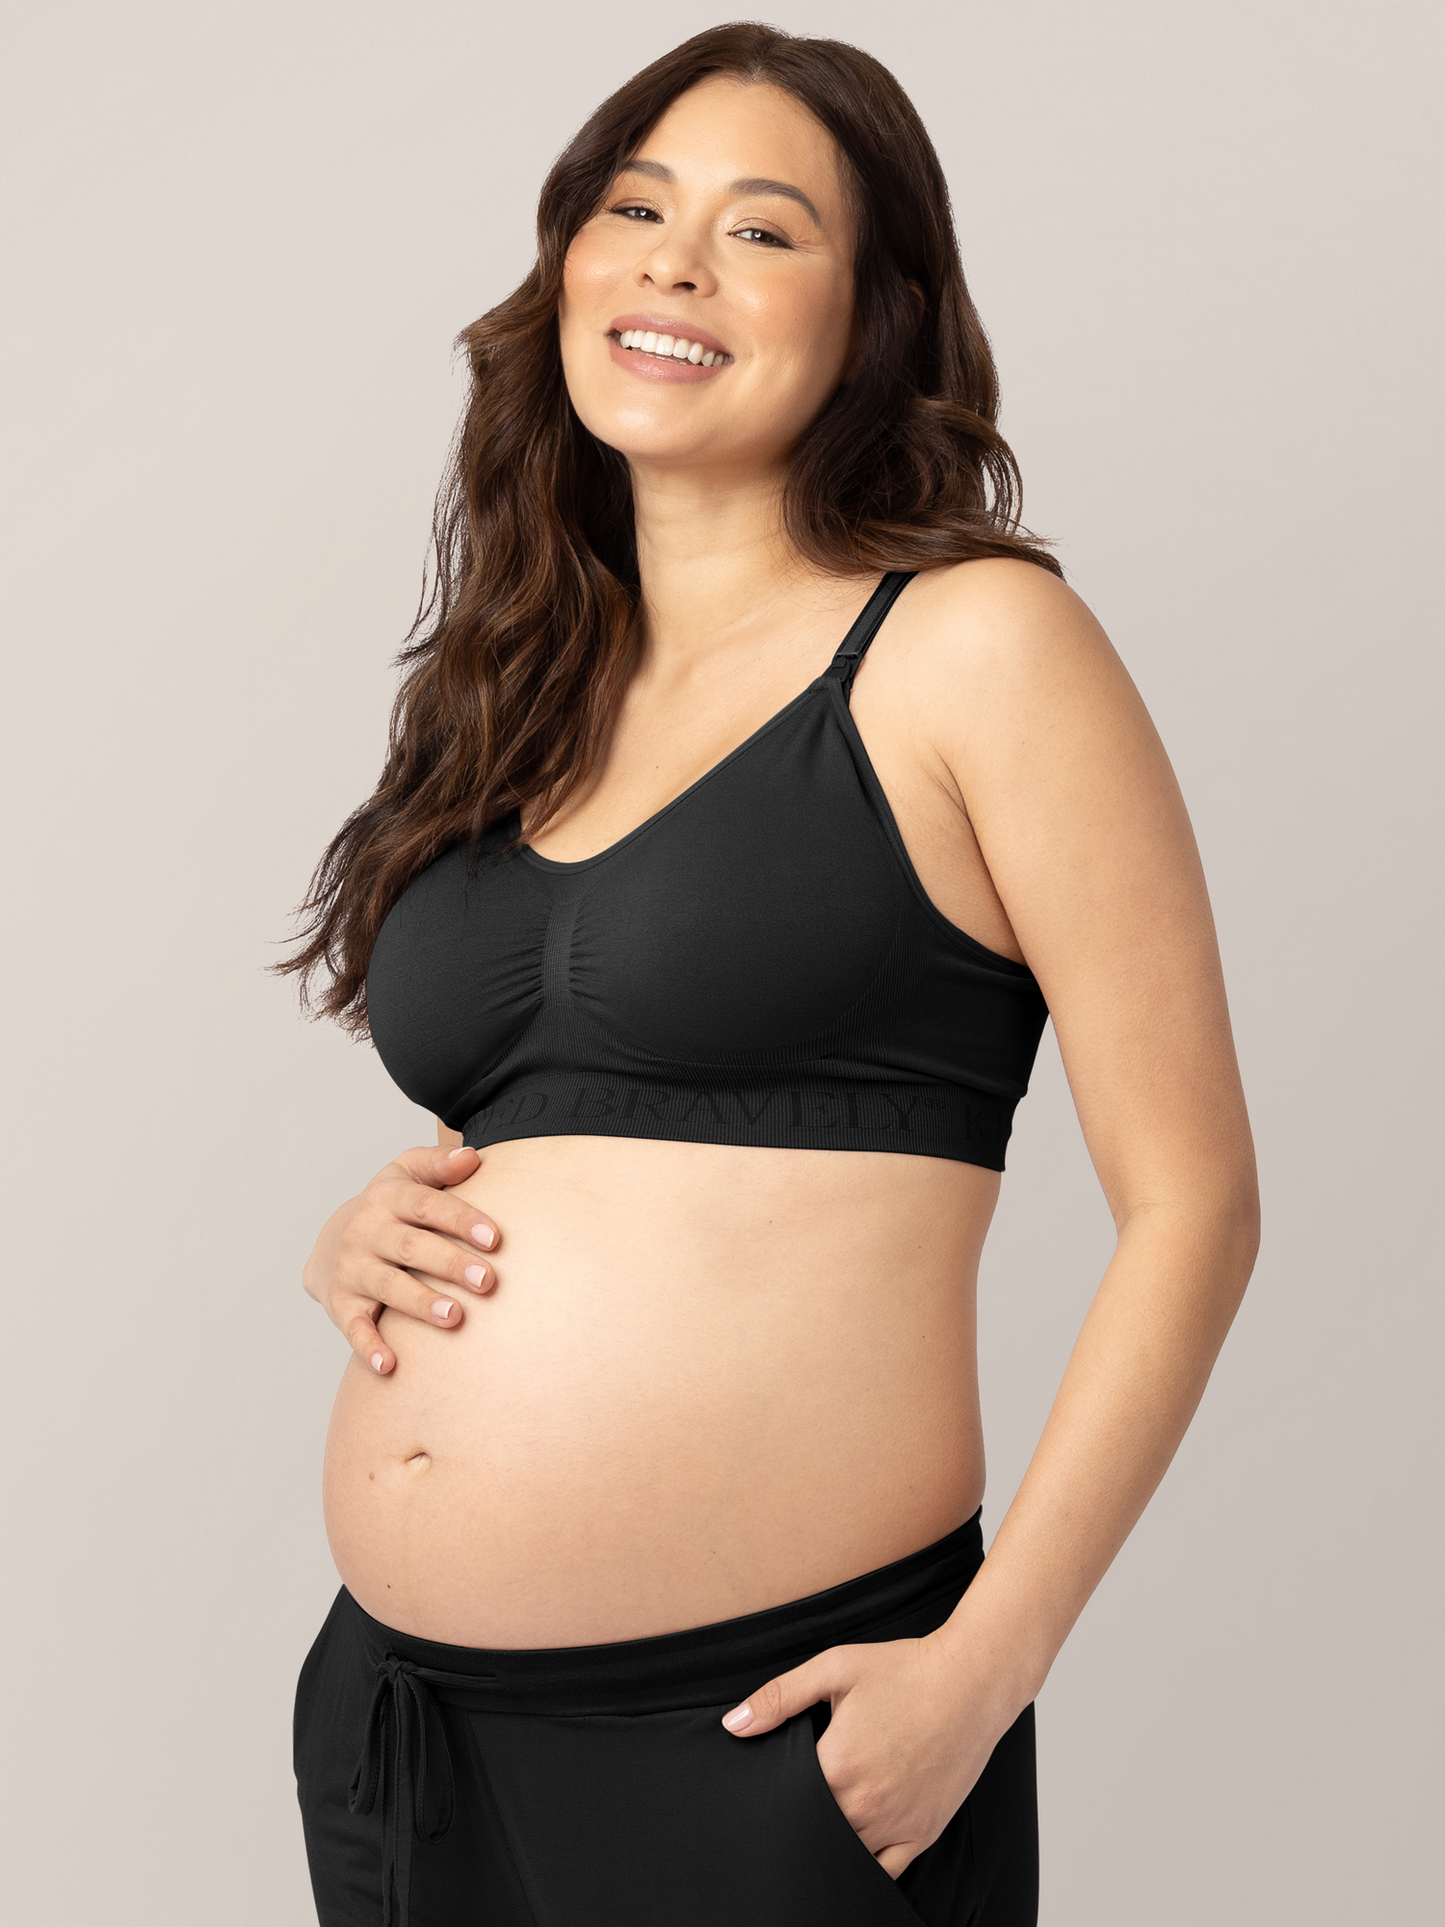 Pregnant model wearing the Simply Sublime® Nursing Bra in Black with her hand in her pocket.